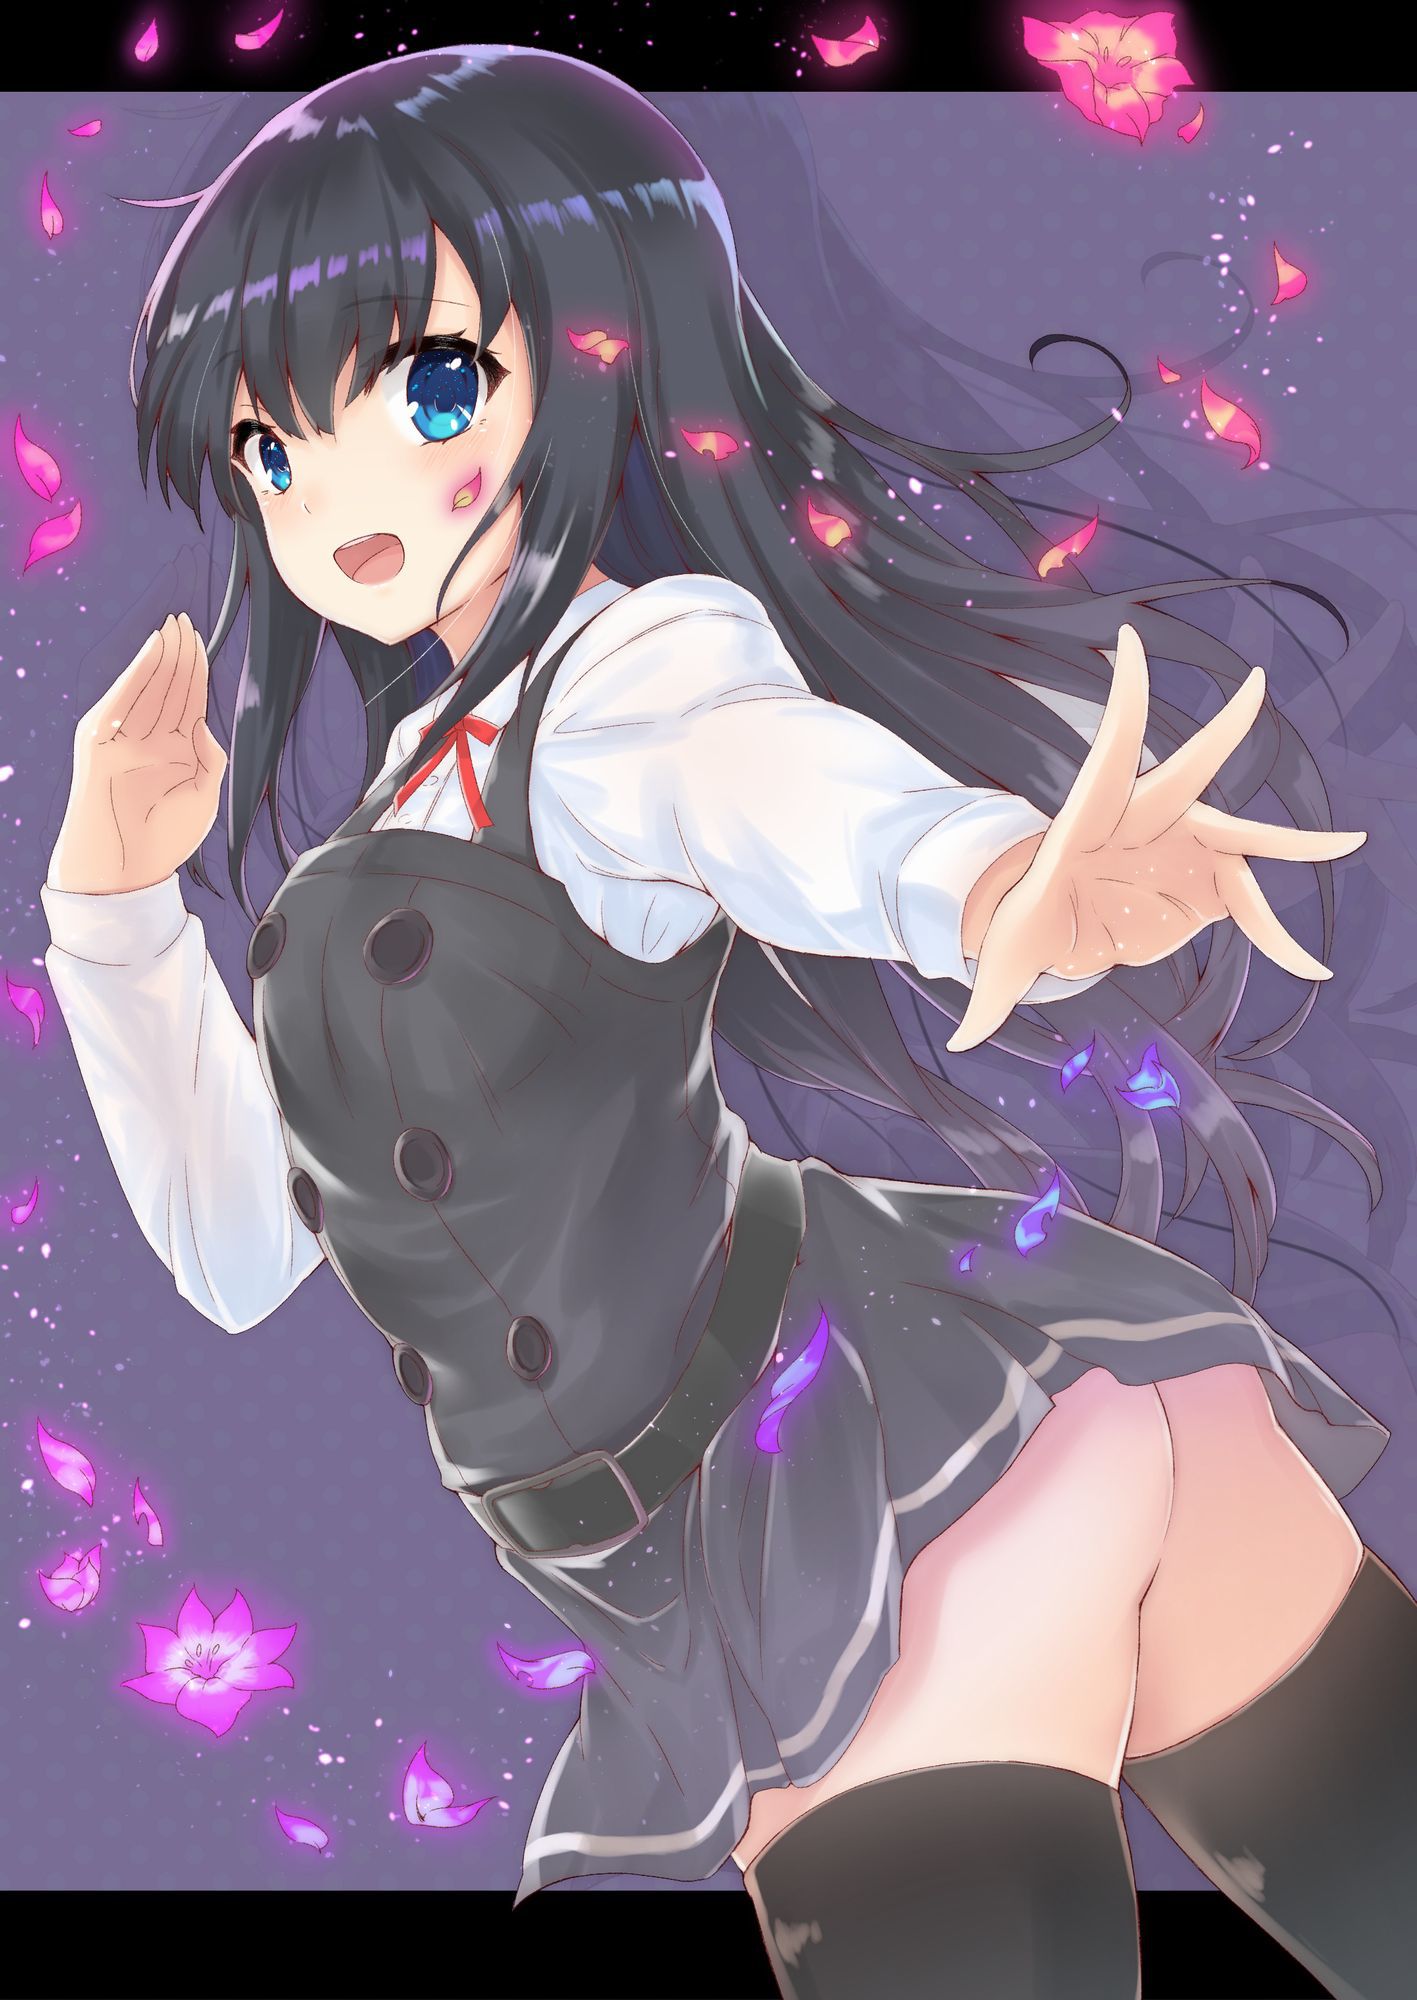 [Secondary, ZIP] pretty serious ship it together images of asashio 100 65